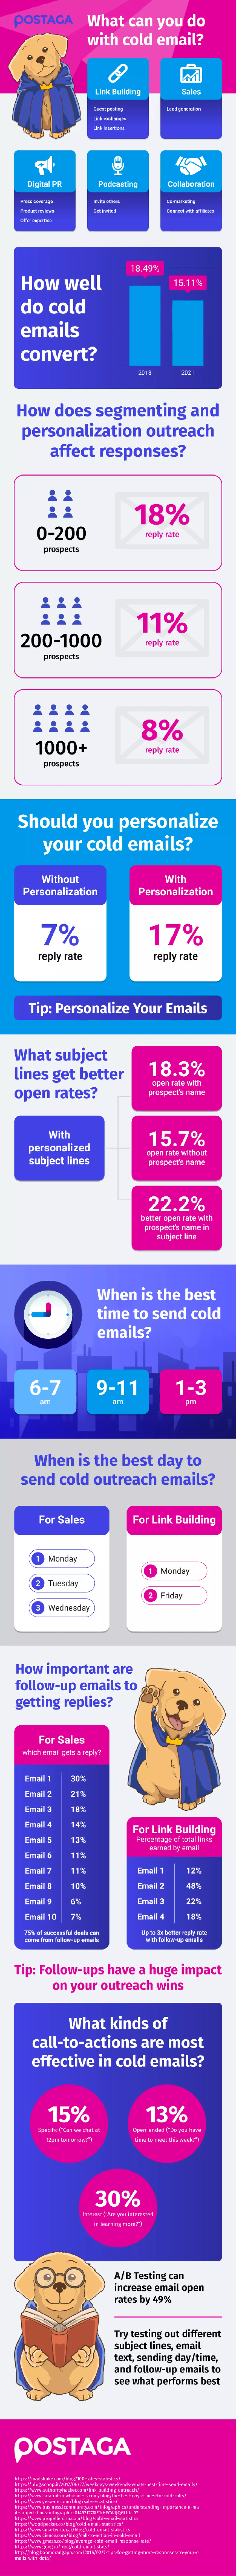 cold email infographic - Make Meaningful Business Connections and More –10 Brilliant Business Tips of the Week